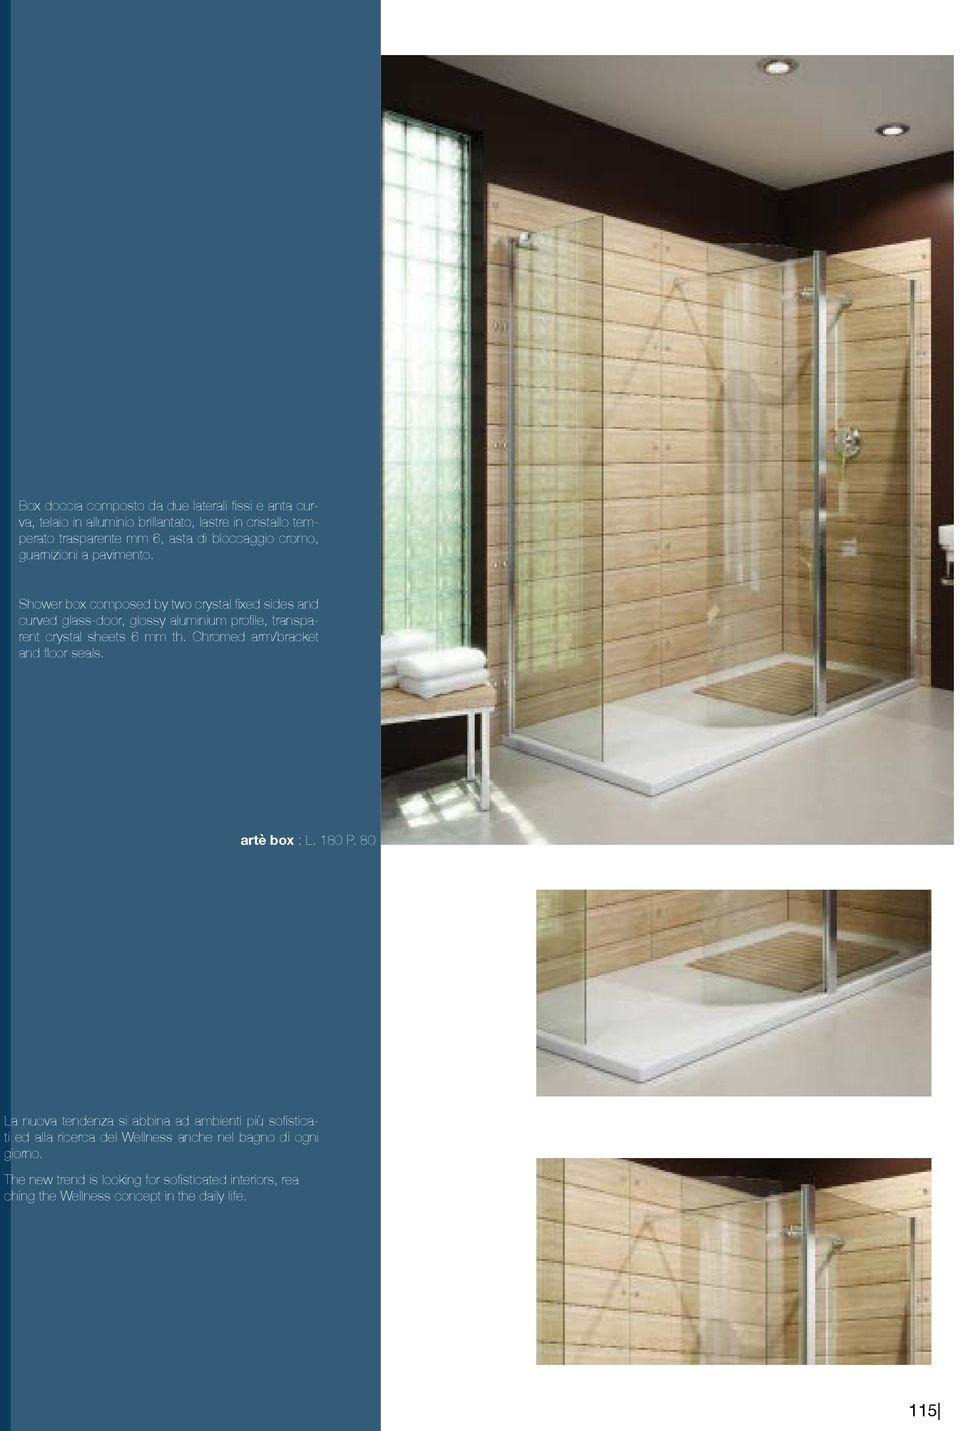 Shower box composed by two crystal fixed sides and curved glass-door, glossy aluminium profile, transparent crystal sheets 6 mm th.